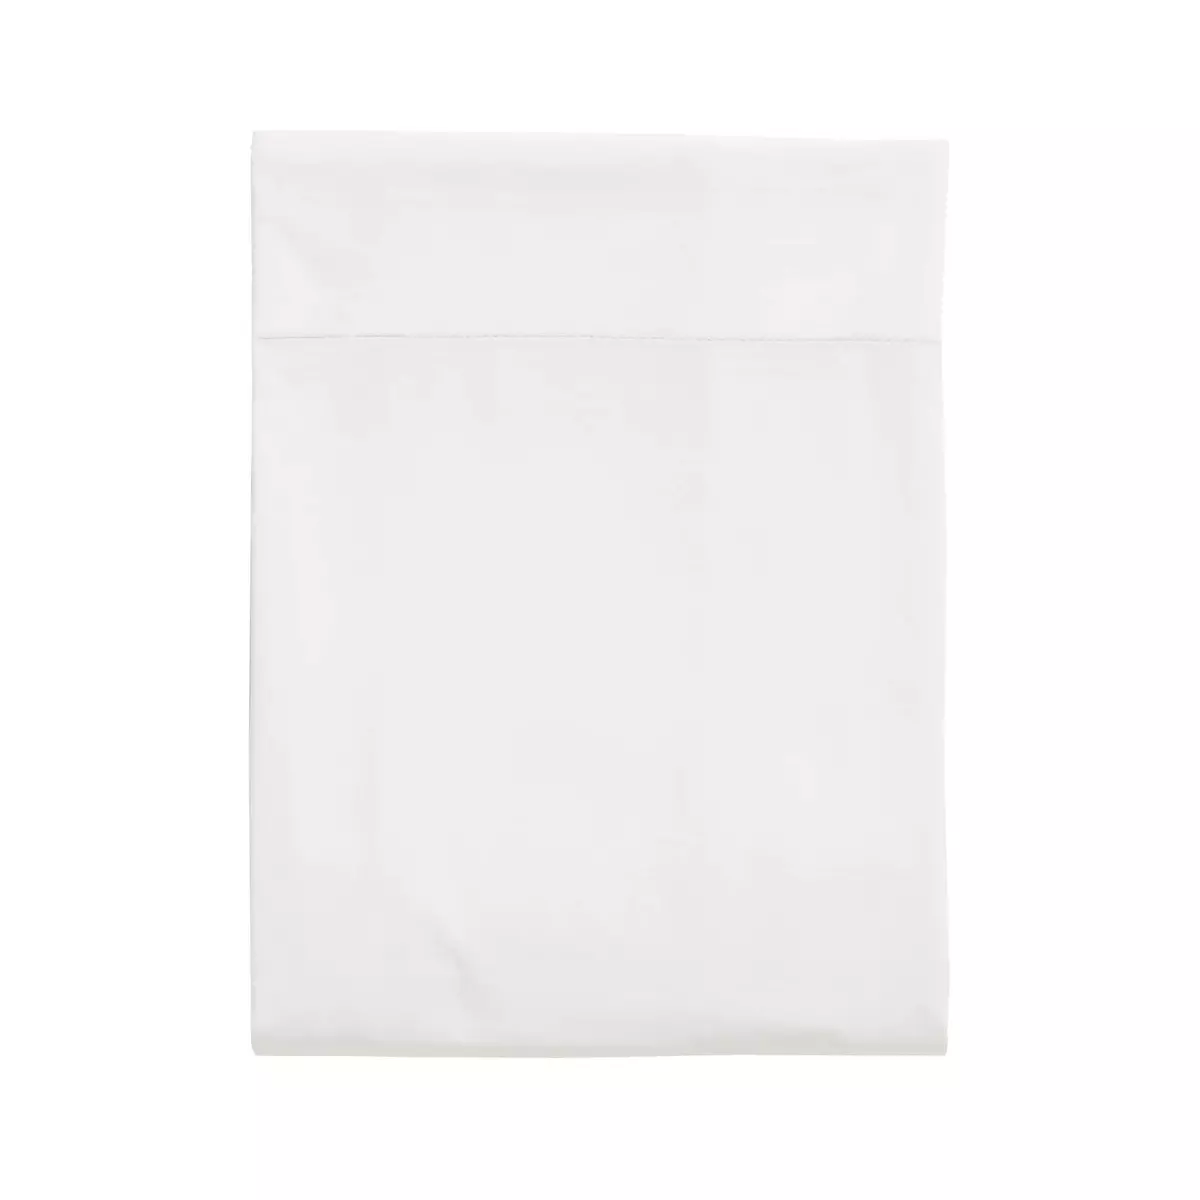 Terre de Nuit Drap plat percale made in France